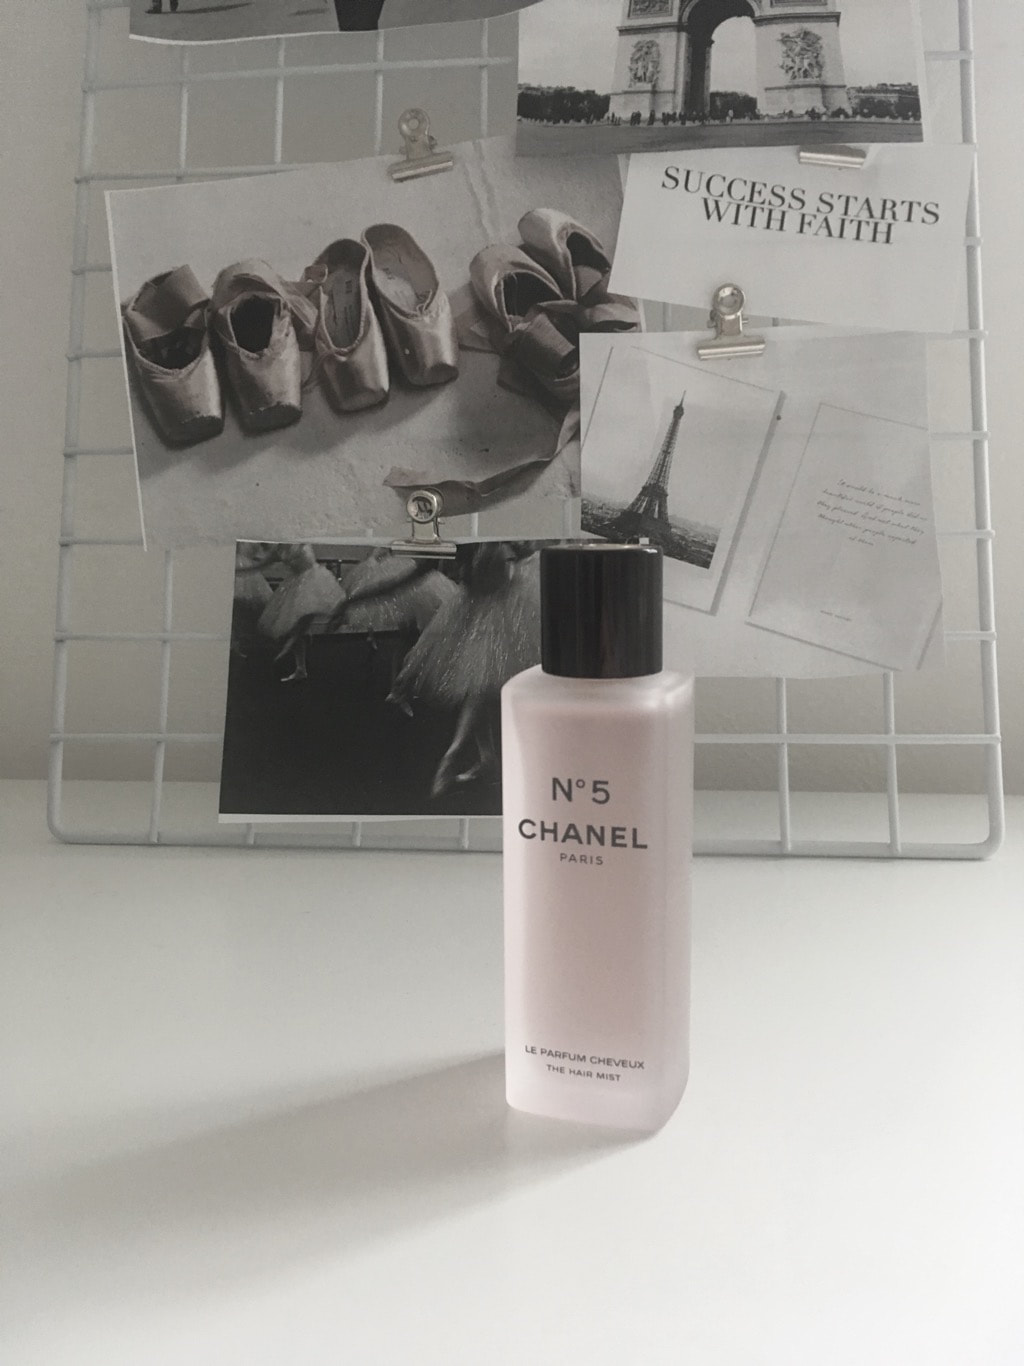 Chanel n°5 hair mist review - ZOË MARCH